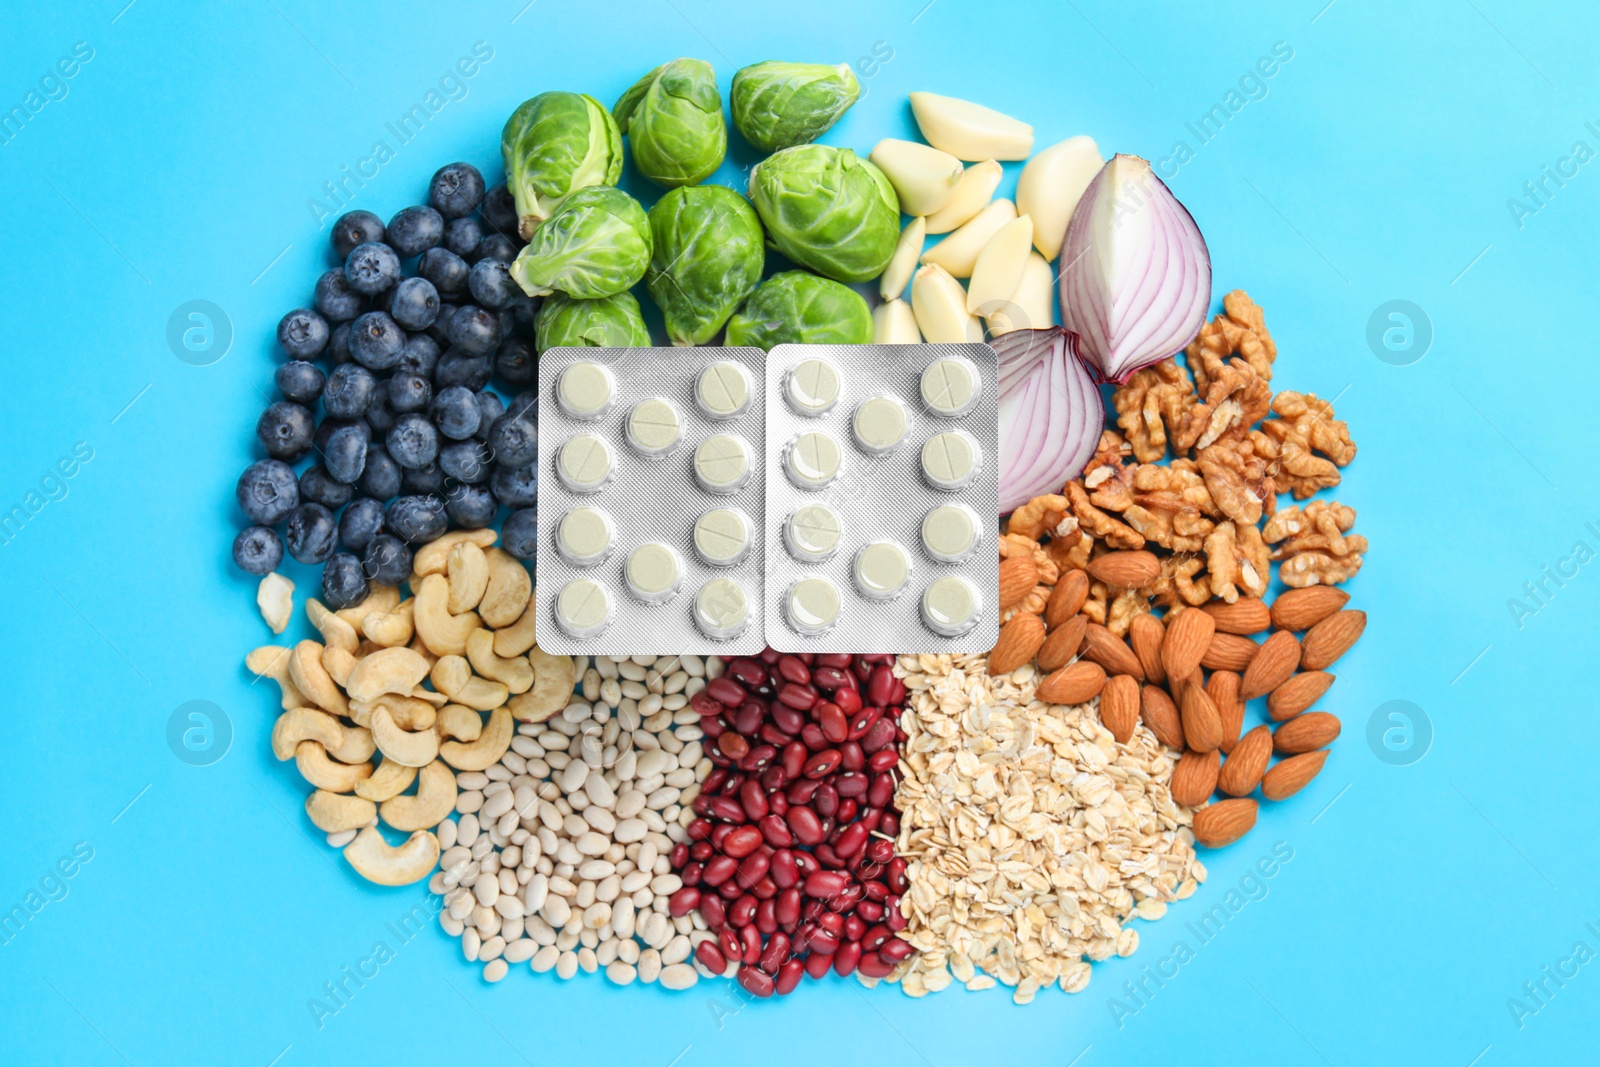 Photo of Blisters of pills and foodstuff on light blue background, flat lay. Prebiotic supplements